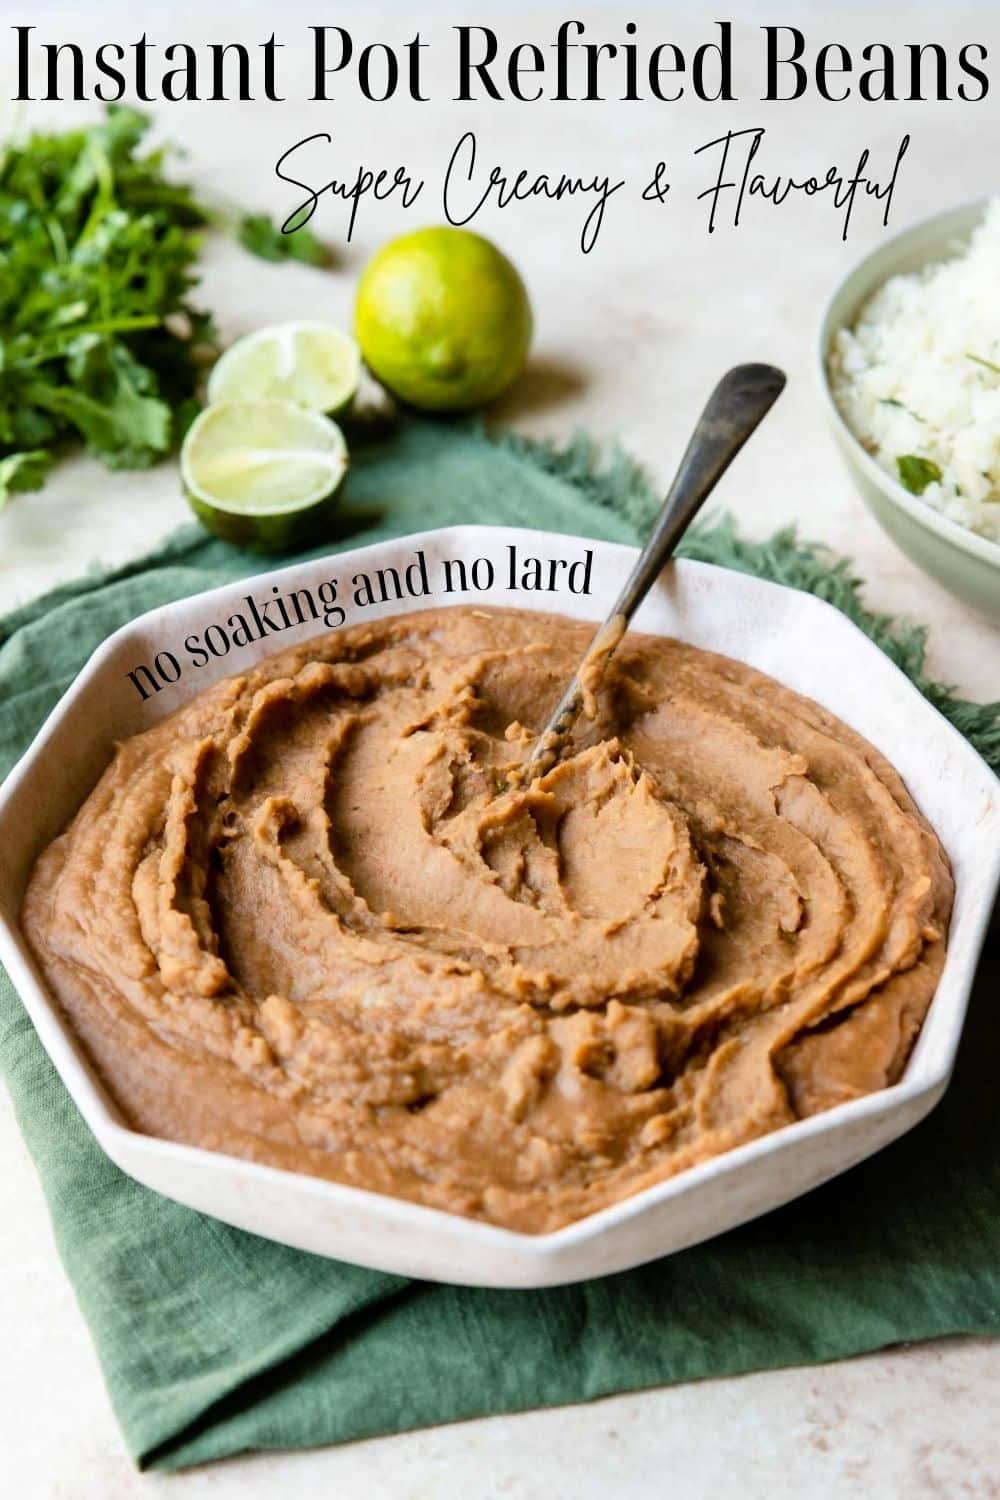 pinterest image with text for Instant Pot Refried Beans